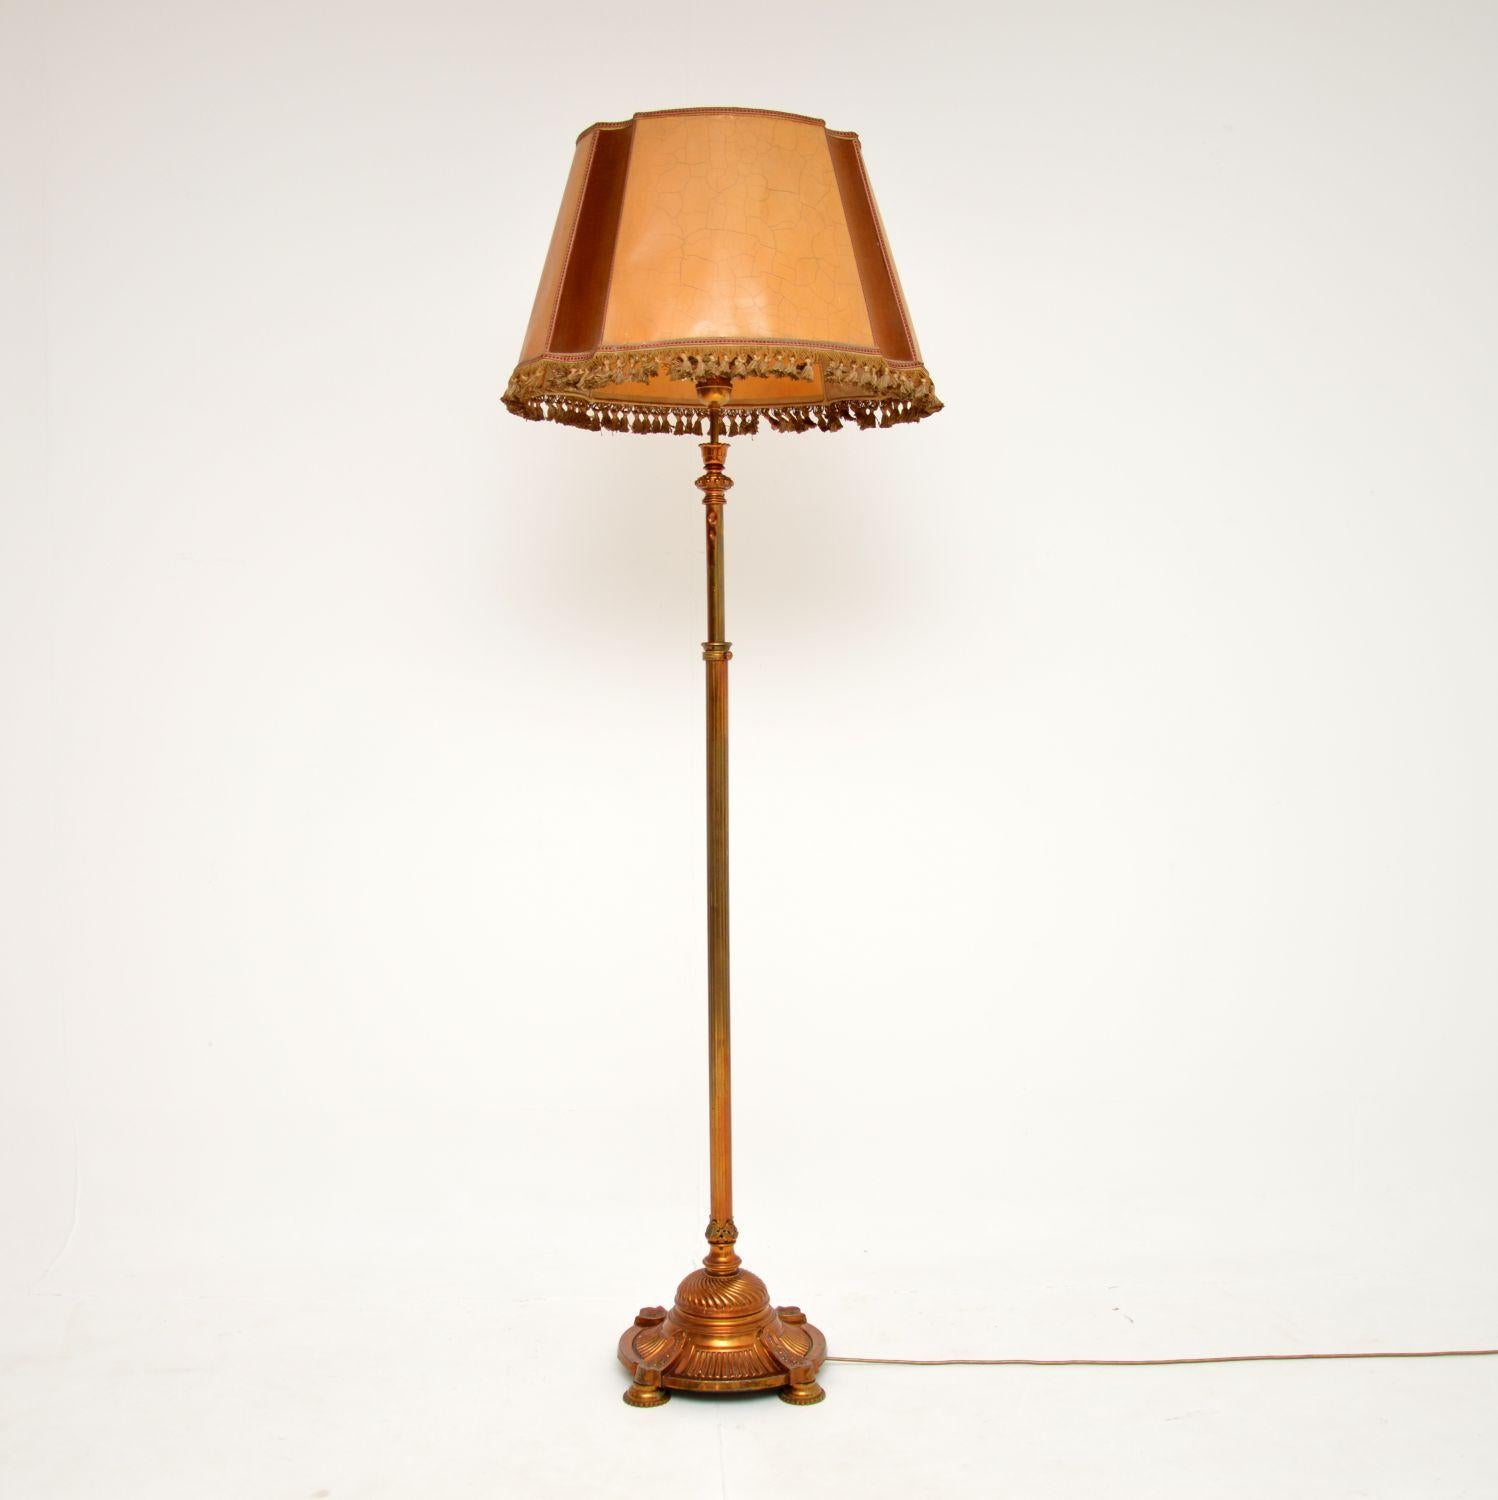 A stunning original antique French lamp, beautifully made from gilt brass. This was made in France around the 1910-1920 period.

It is of extremely fine quality, the frame is very heavy and has a working rise and fall mechanism to adjust the height